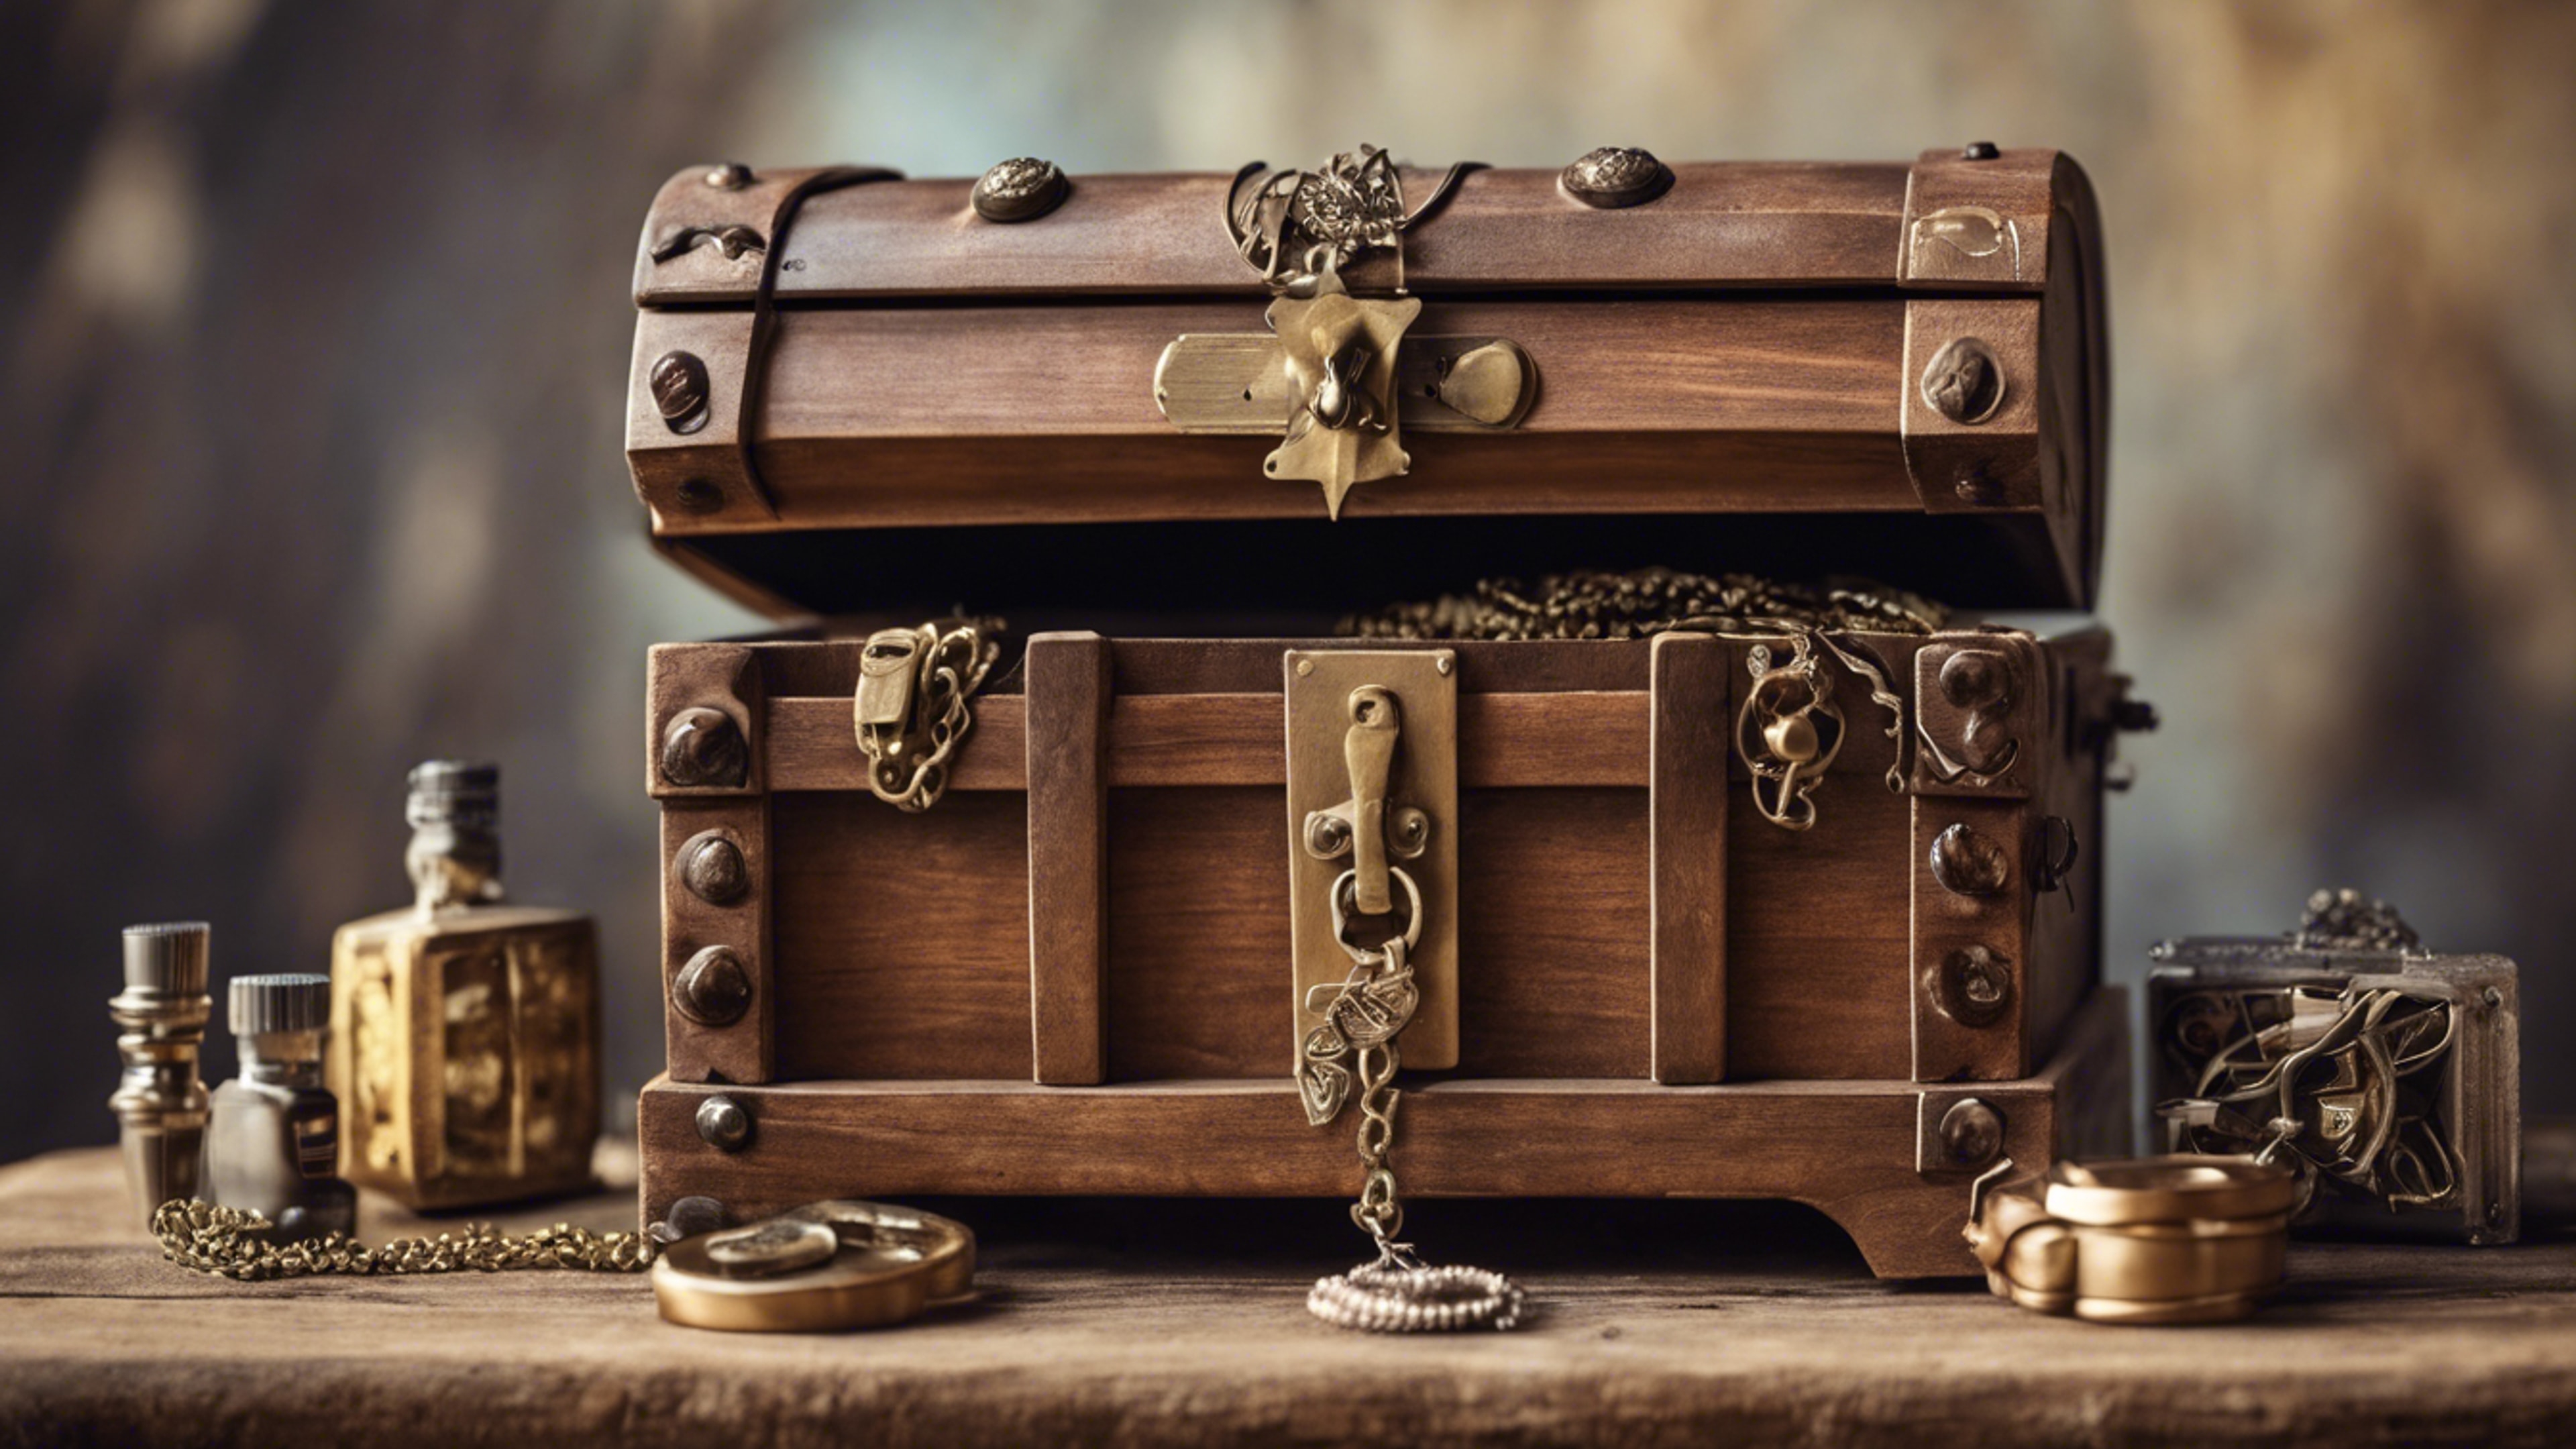 Wooden vintage chest with aged trinkets and jewelry inside. Wallpaper[9faa1a26a5984e1a92f7]